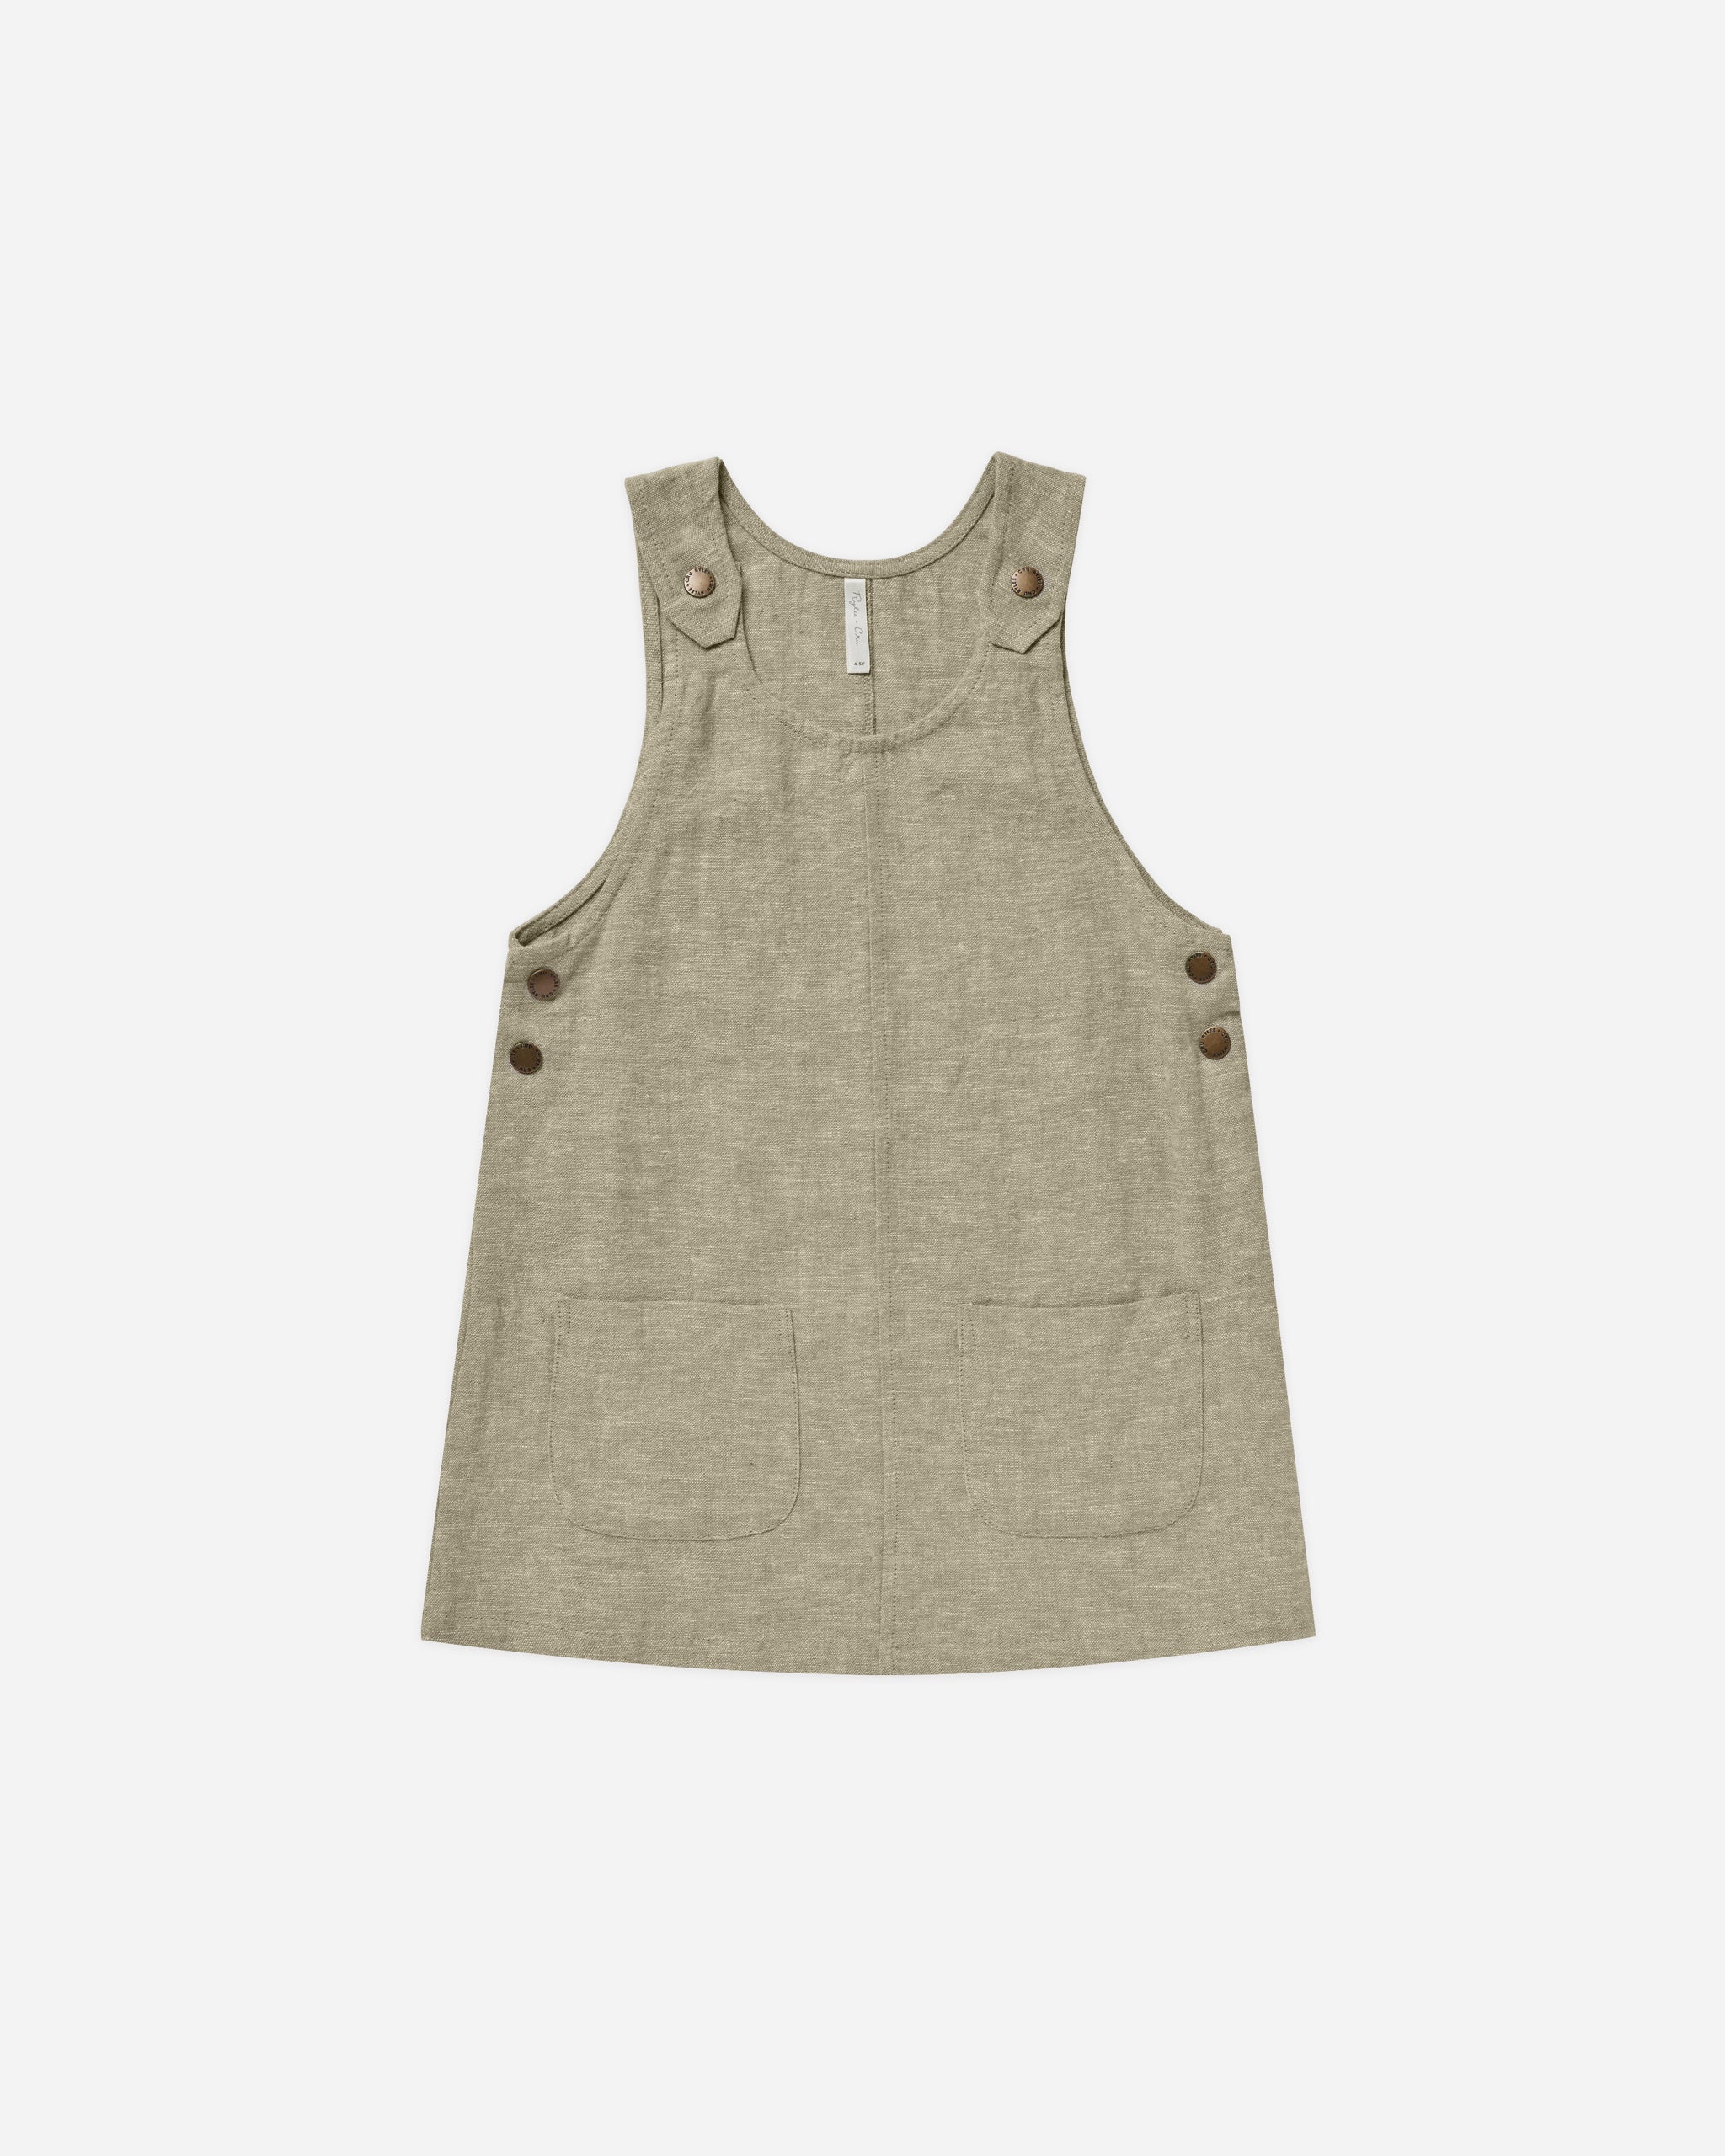 Overall Dress || Fern - Rylee + Cru | Kids Clothes | Trendy Baby Clothes | Modern Infant Outfits |